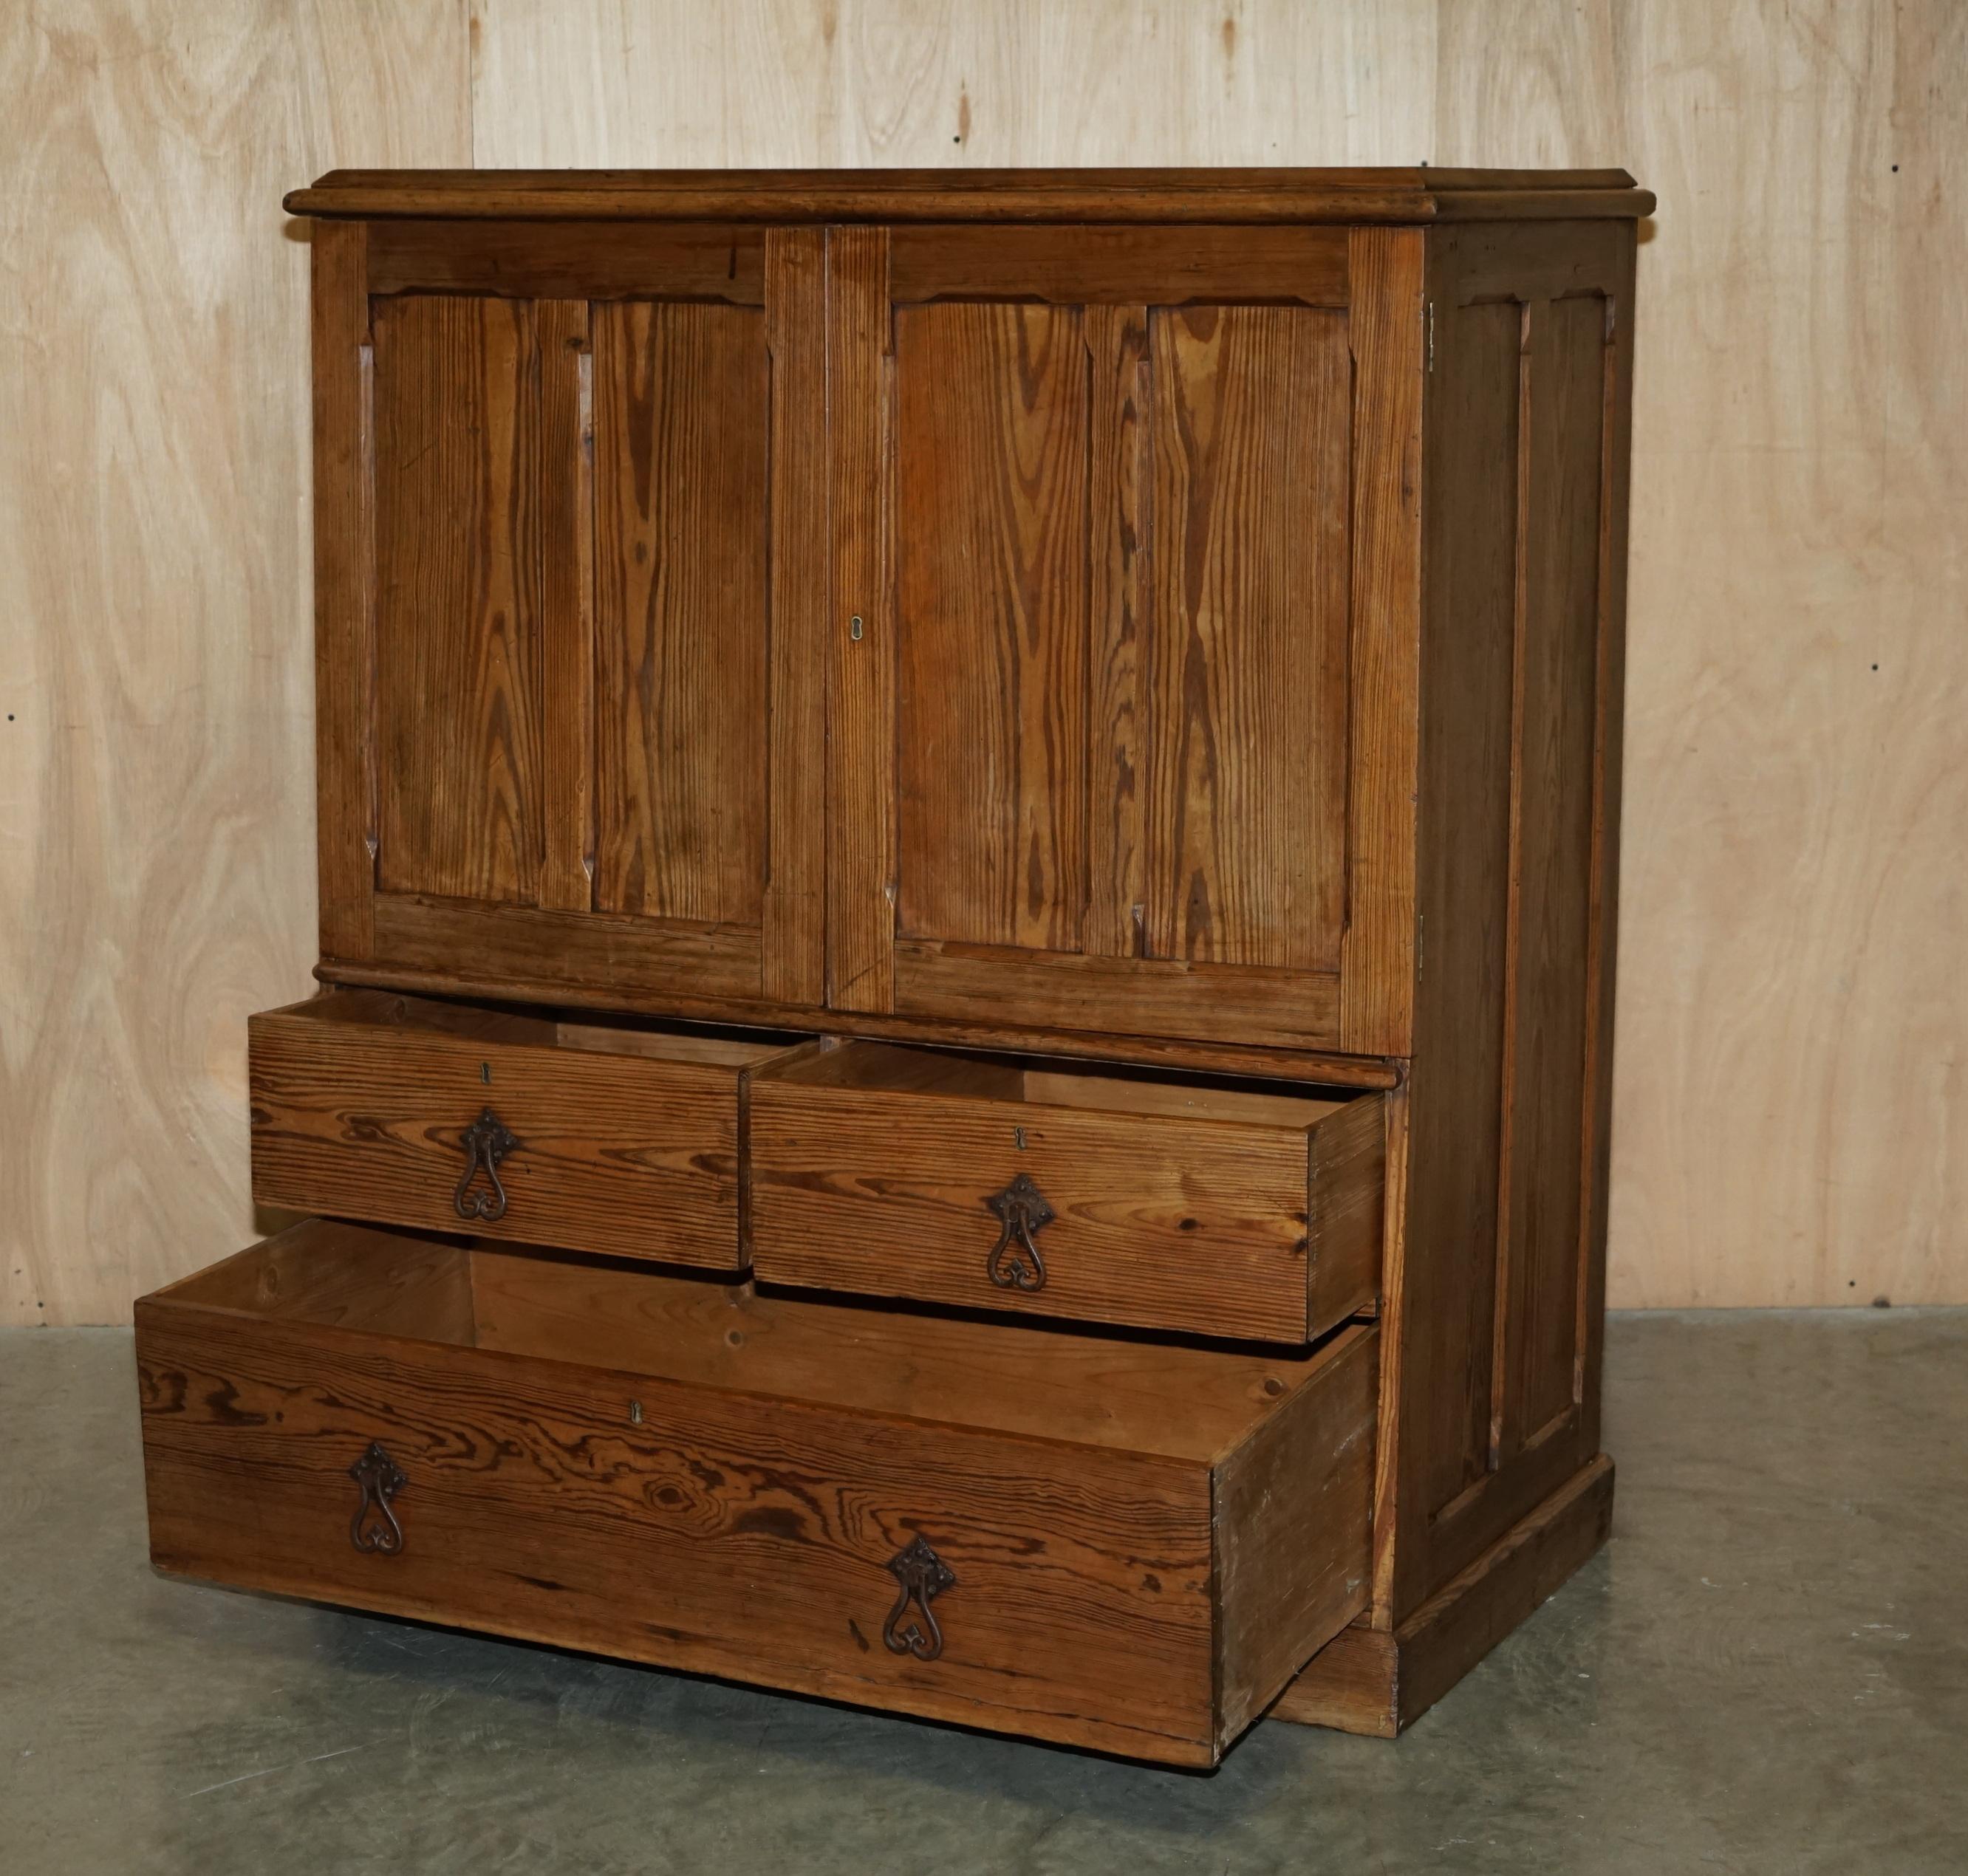 Royal House Antiques

Royal House Antiques is delighted to offer for sale this stunning highly collectable, medium sized, Victorian pine housekeepers cupboard for linens or pots

Please note the delivery fee listed is just a guide, it covers within